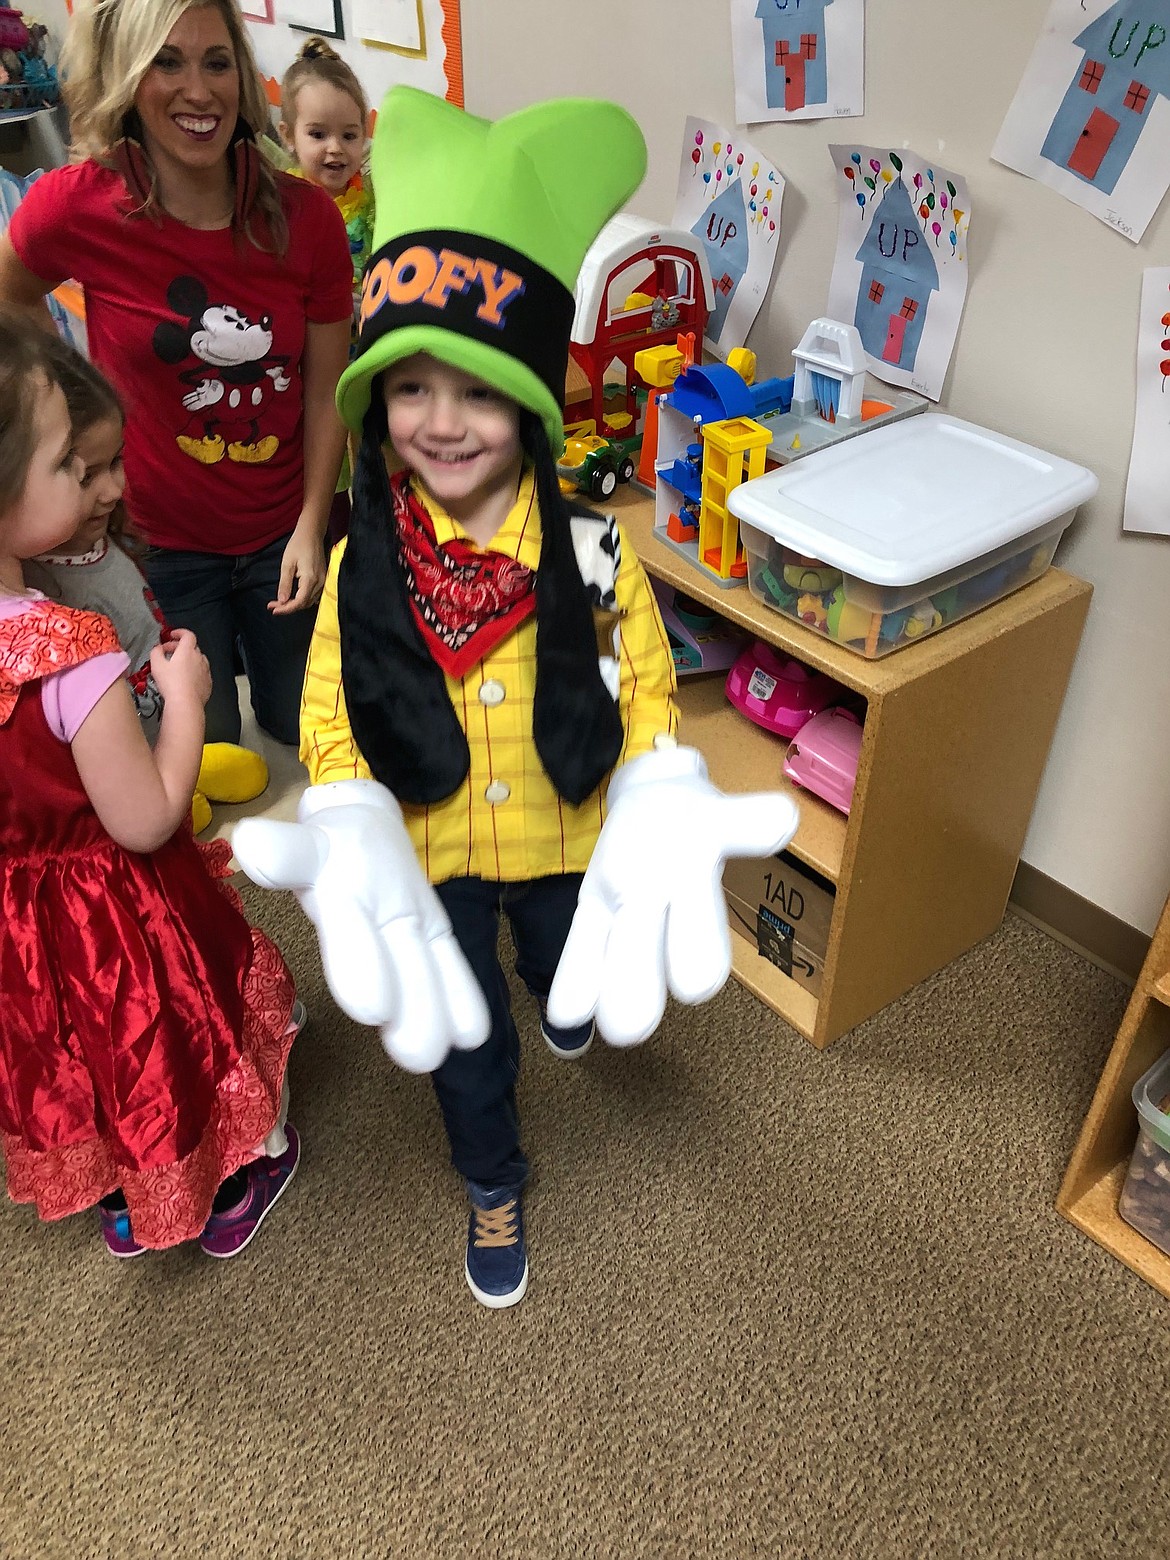 Landon Hill, 4, smiles from as he goofs around in Goofy hat and gloves during his Make-A-Wish Idaho wish reveal at ABCD Daycare in Hayden in February 2017. Landon, a cancer survivor, was granted his wish to go to Disney World through Make-A-Wish Idaho, a nonprofit that helps dreams come true for kids experiencing life-threatening conditions. The organization is in need of volunteer wish granters to help make these dreams happen. &quot;He was having a lot of fun that day,&quot; said wish granter Blaine Eckles. &quot;Such joy.&quot; (Courtesy photo)